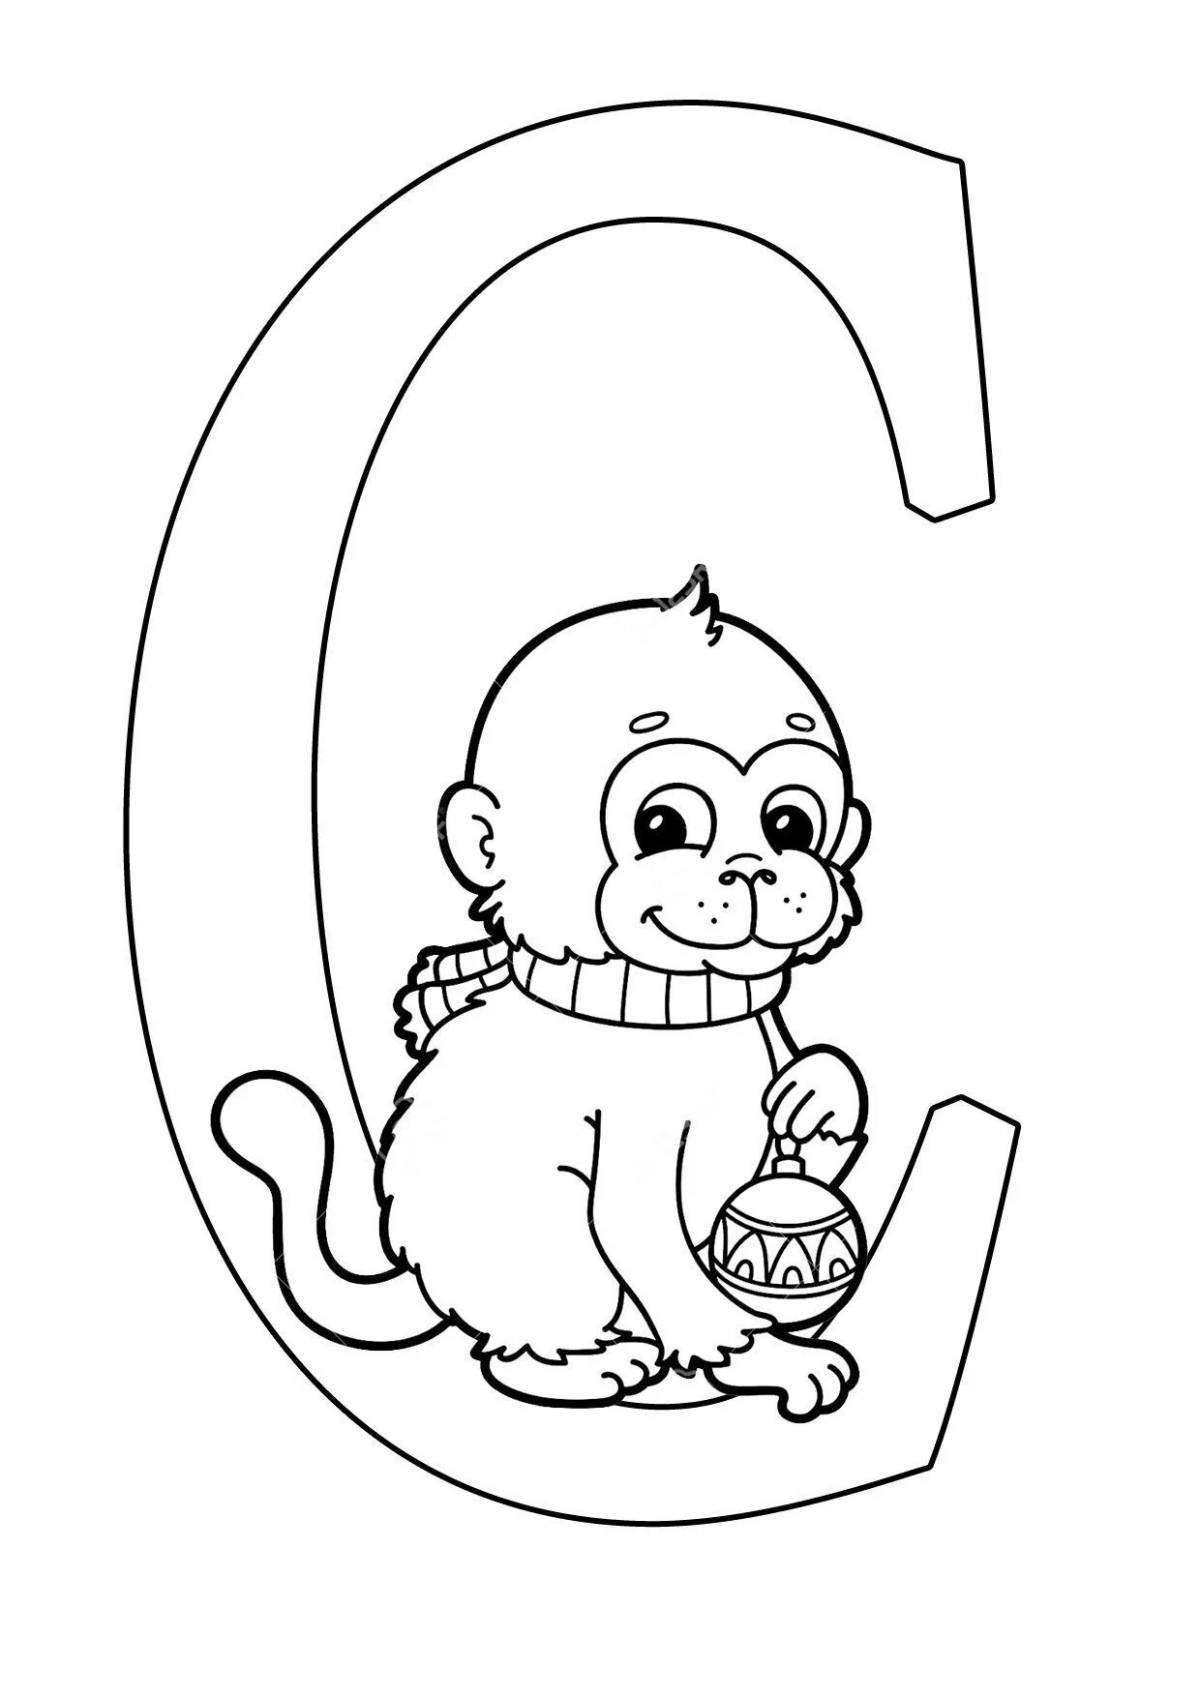 Happy New Year holiday lettering coloring page